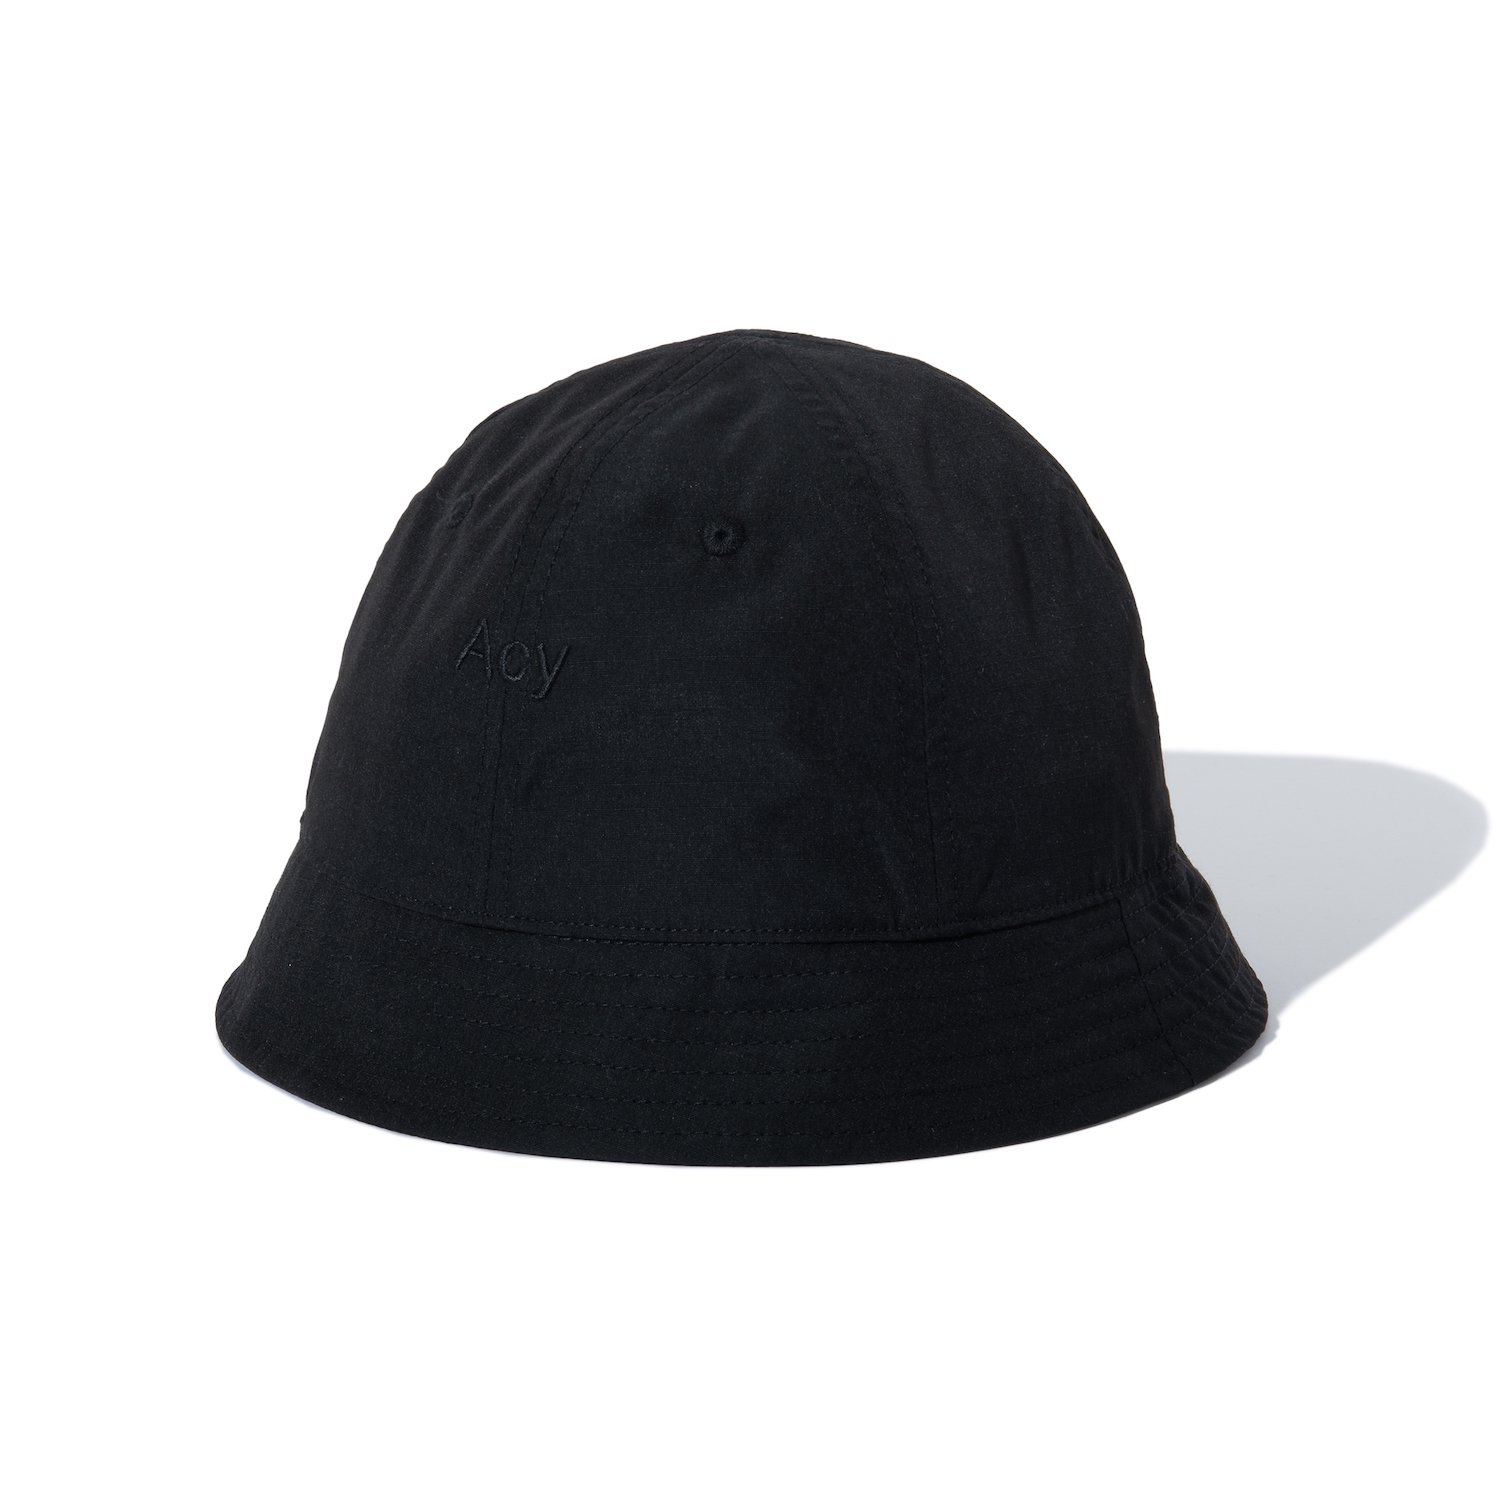 Acy<br>6PANEL HAT<br>